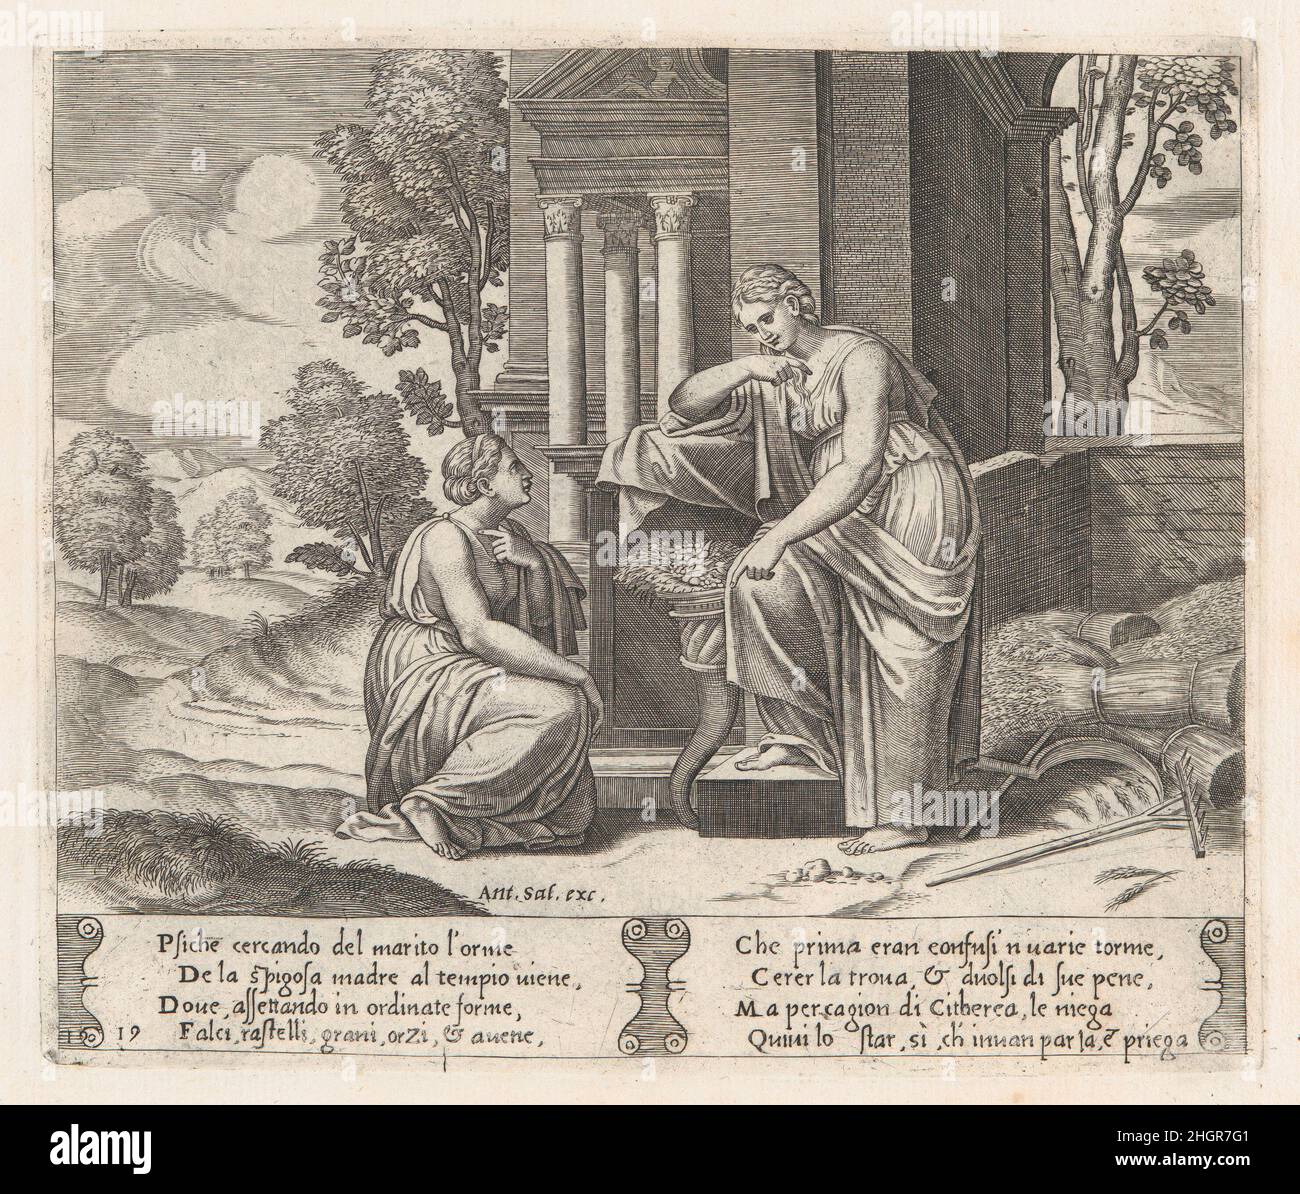 Plate 19: Ceres at right, leaning on a pedestal, refusing to assist Psyche, from the Story of Cupid and Psyche as told by Apuleius 1530–60 Master of the Die Italian This book contains 32 plates bound together, 3 of which are by Agostino Veneziano.. Plate 19: Ceres at right, leaning on a pedestal, refusing to assist Psyche, from the Story of Cupid and Psyche as told by Apuleius. The Story of Cupid and Psyche as told by Apuleius. Master of the Die (Italian, active Rome, ca. 1530–60). 1530–60. Engraving. Antonio Salamanca (Salamanca 1478–1562 Rome). Prints Stock Photo